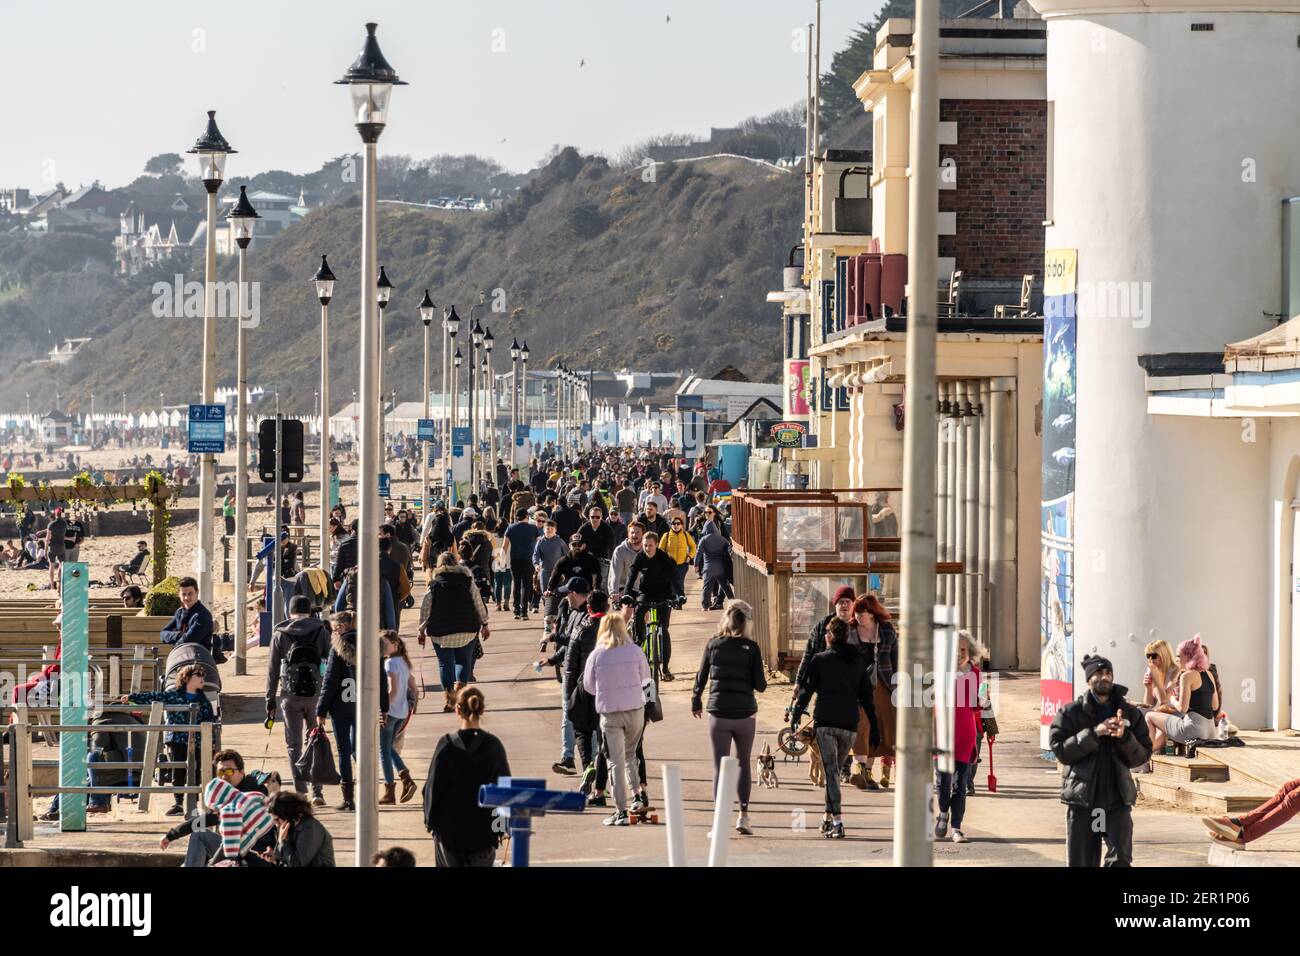 Bournemouth, UK. Sunday 28 March 2021. Crowds of people on Bournemouth promenade with some social distancing. Credit: Thomas Faull/Alamy Live News Stock Photo